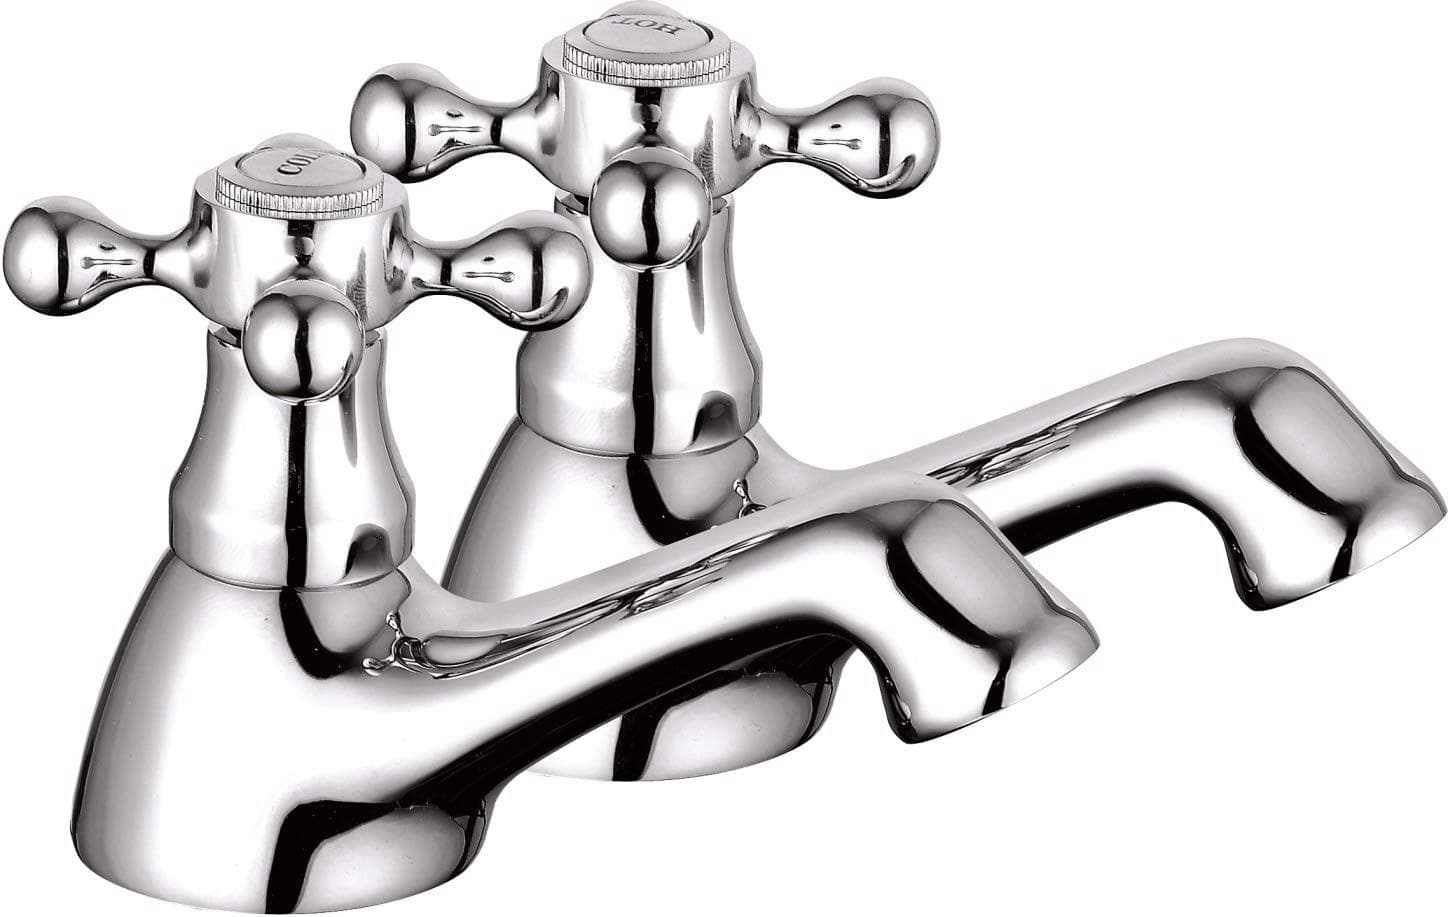 VeeBath Taps > Basin Taps Traditional Round Basin Taps Basin Sink Twin Taps Hot and Cold Taps Bathroom Water Faucet Pair Chrome